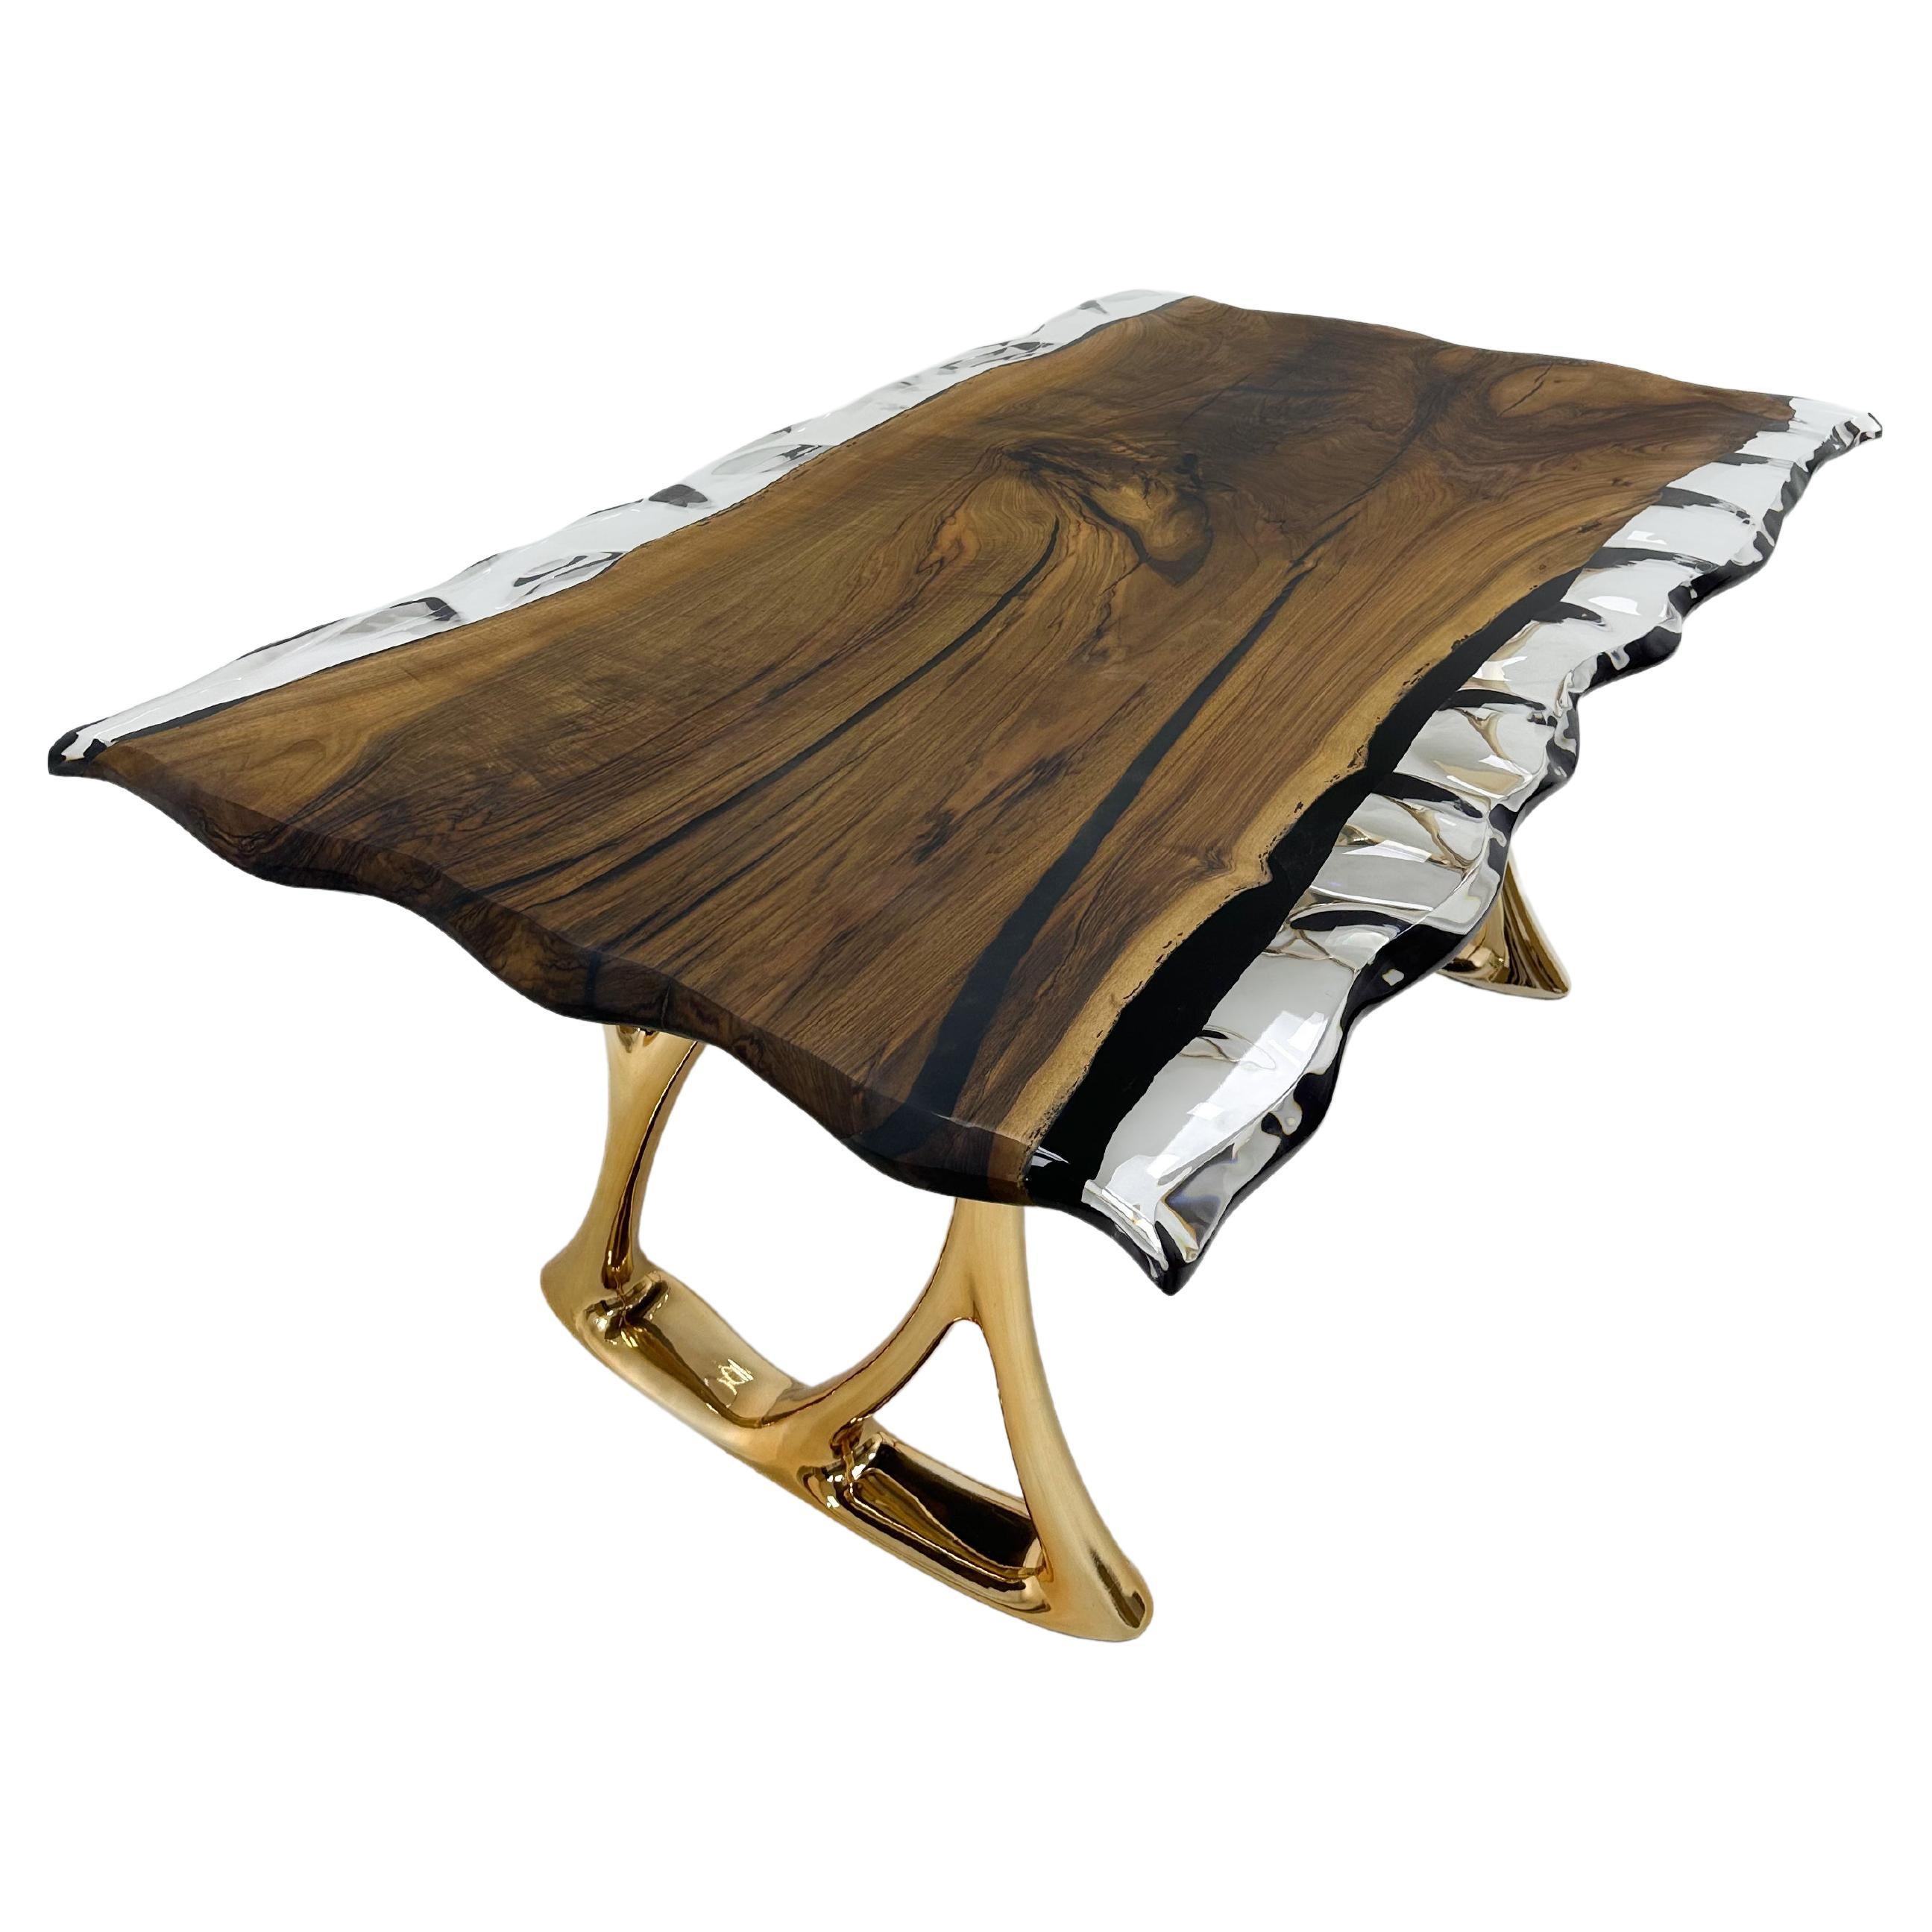 Custom Clear Epoxy Resin Walnut Wood Dining Table - Natural Wood Table im Angebot